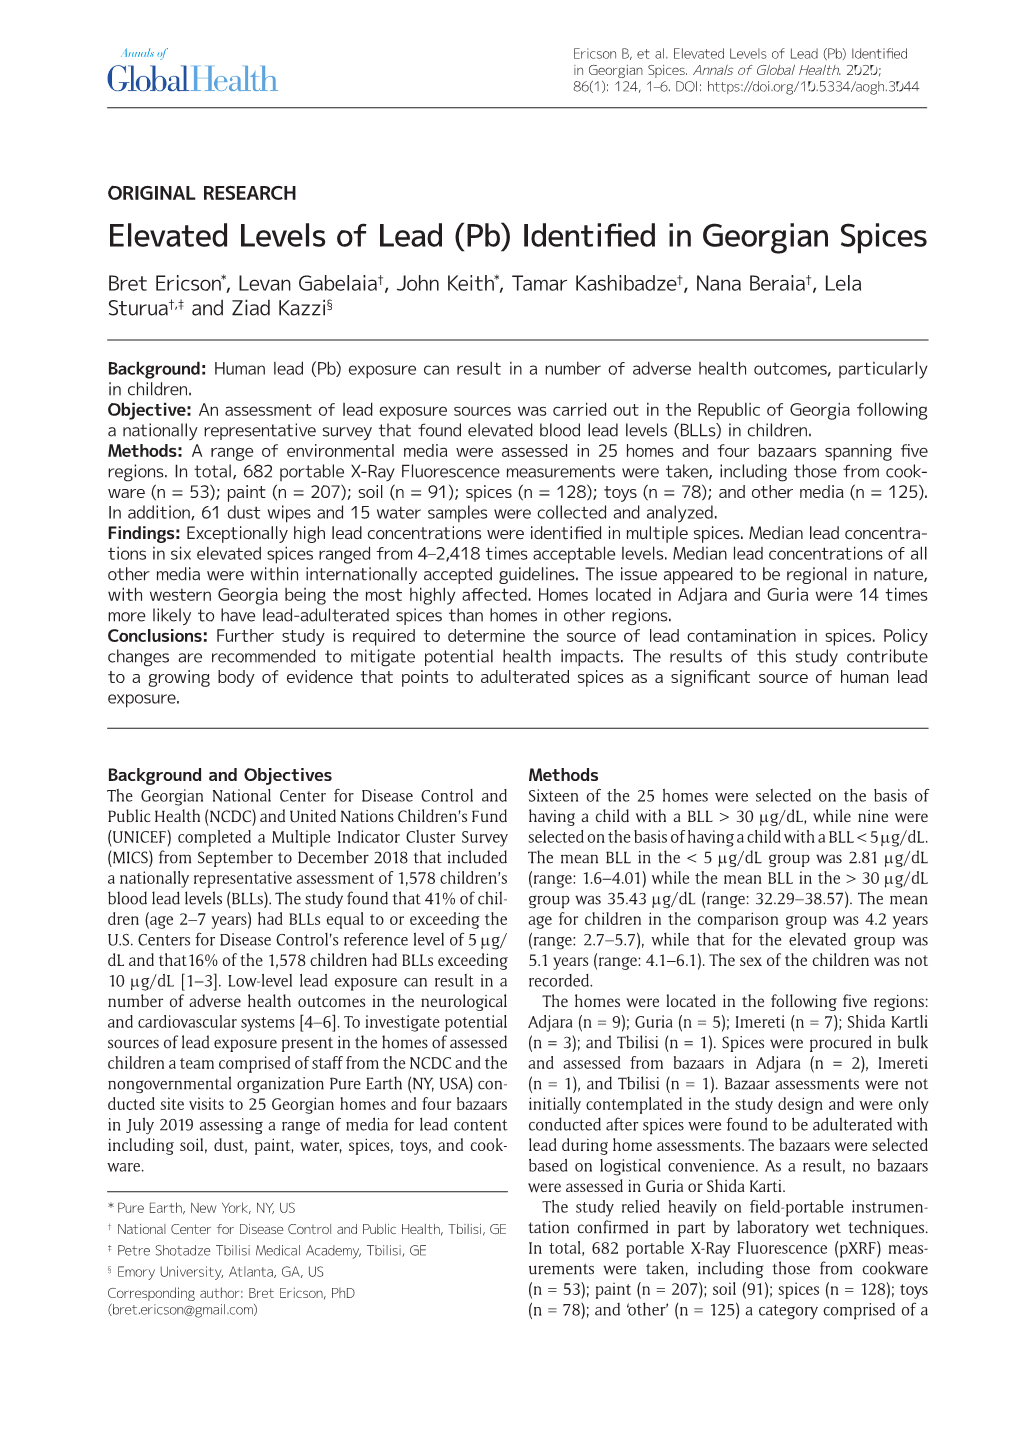 Elevated Levels of Lead (Pb) Identified in Georgian Spices